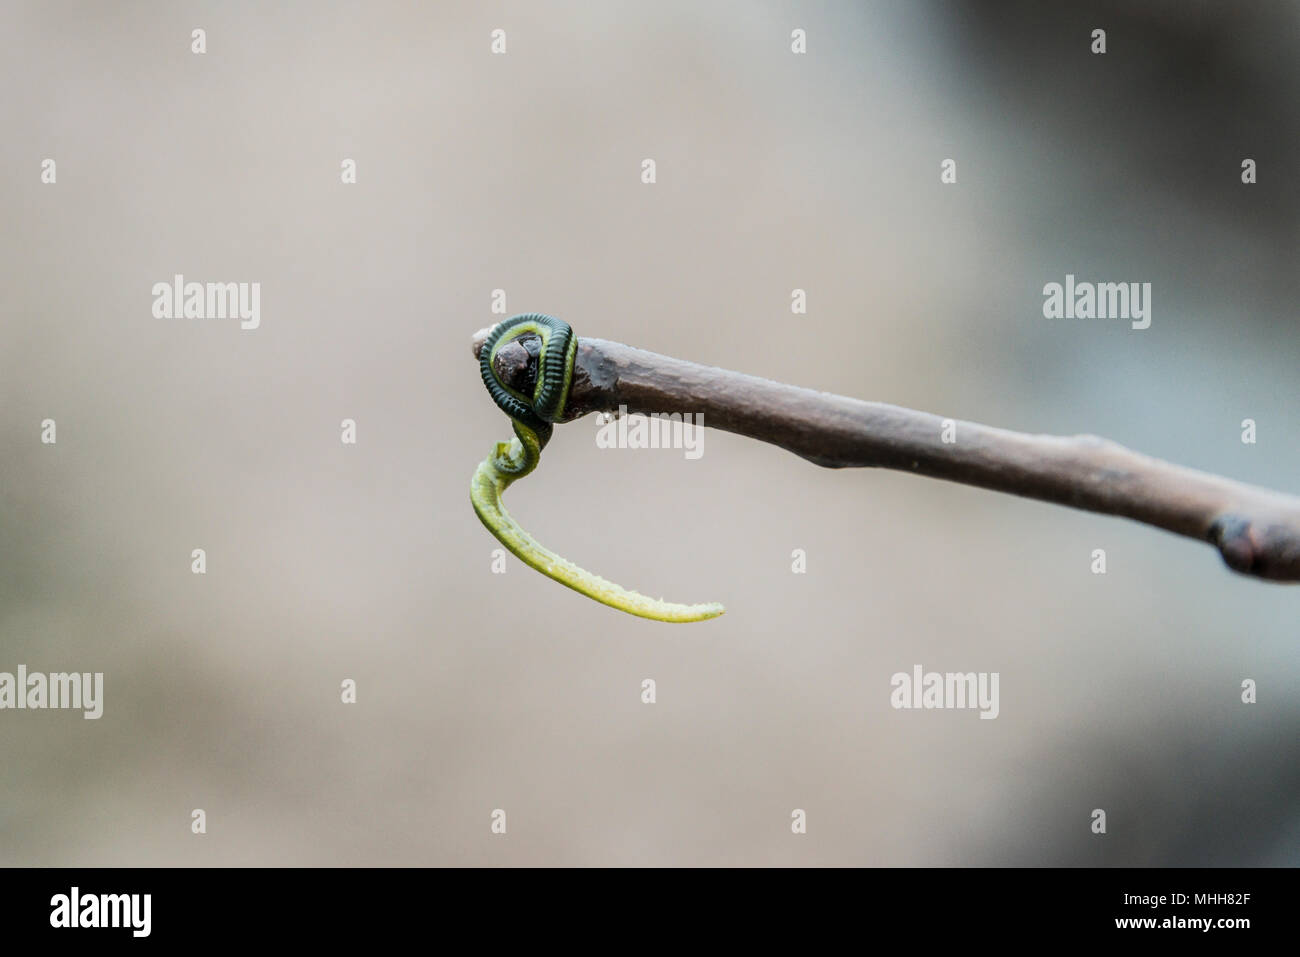 A green-leaf worm (Eulalia viridis) on the end of a stick Stock Photo